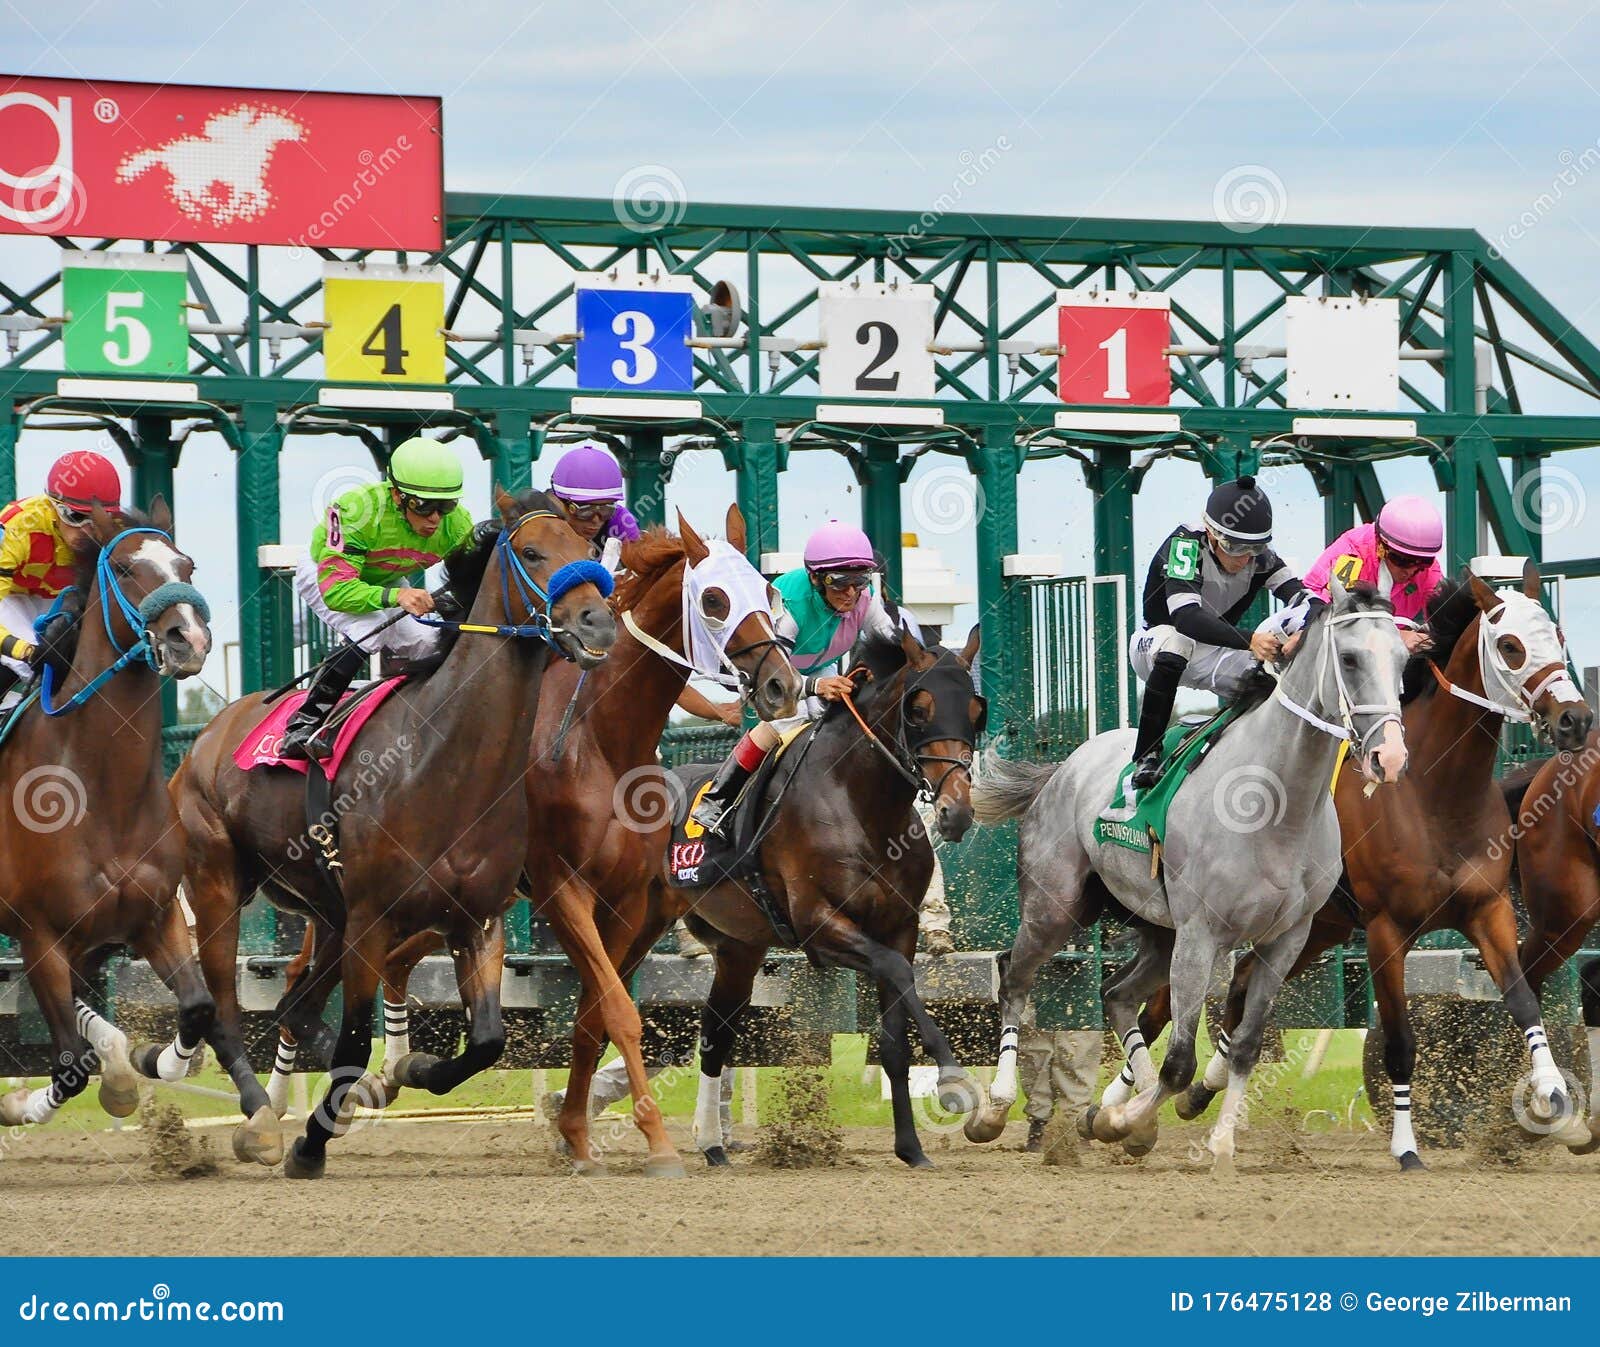 Collection 91+ Images parx casino and racing photos Updated